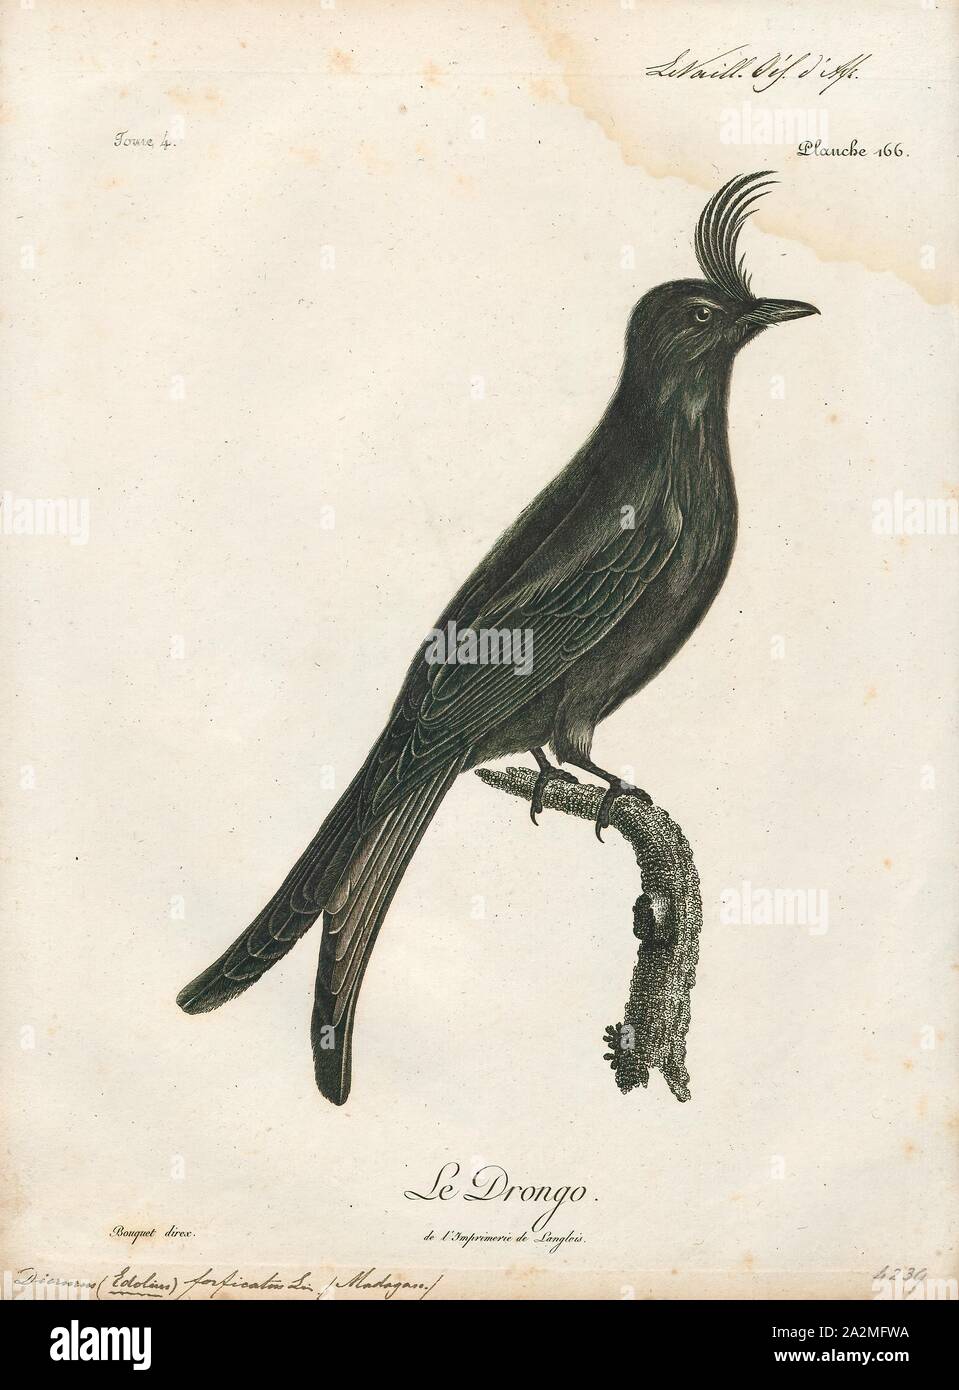 Dicrurus forficatus, Print, The crested drongo (Dicrurus forficatus) is a passerine bird in the family Dicruridae. It is black with a bluish-green sheen, a distinctive crest on the forehead and a forked tail. There are two subspecies; D. f. forficatus is endemic to Madagascar and D. f. potior, which is larger, is found on the Comoro Islands. Its habitat is lowland forests, both dry and humid, and open savannah country. It is a common bird and the IUCN has listed it as 'least concern'., 1796-1808 Stock Photo